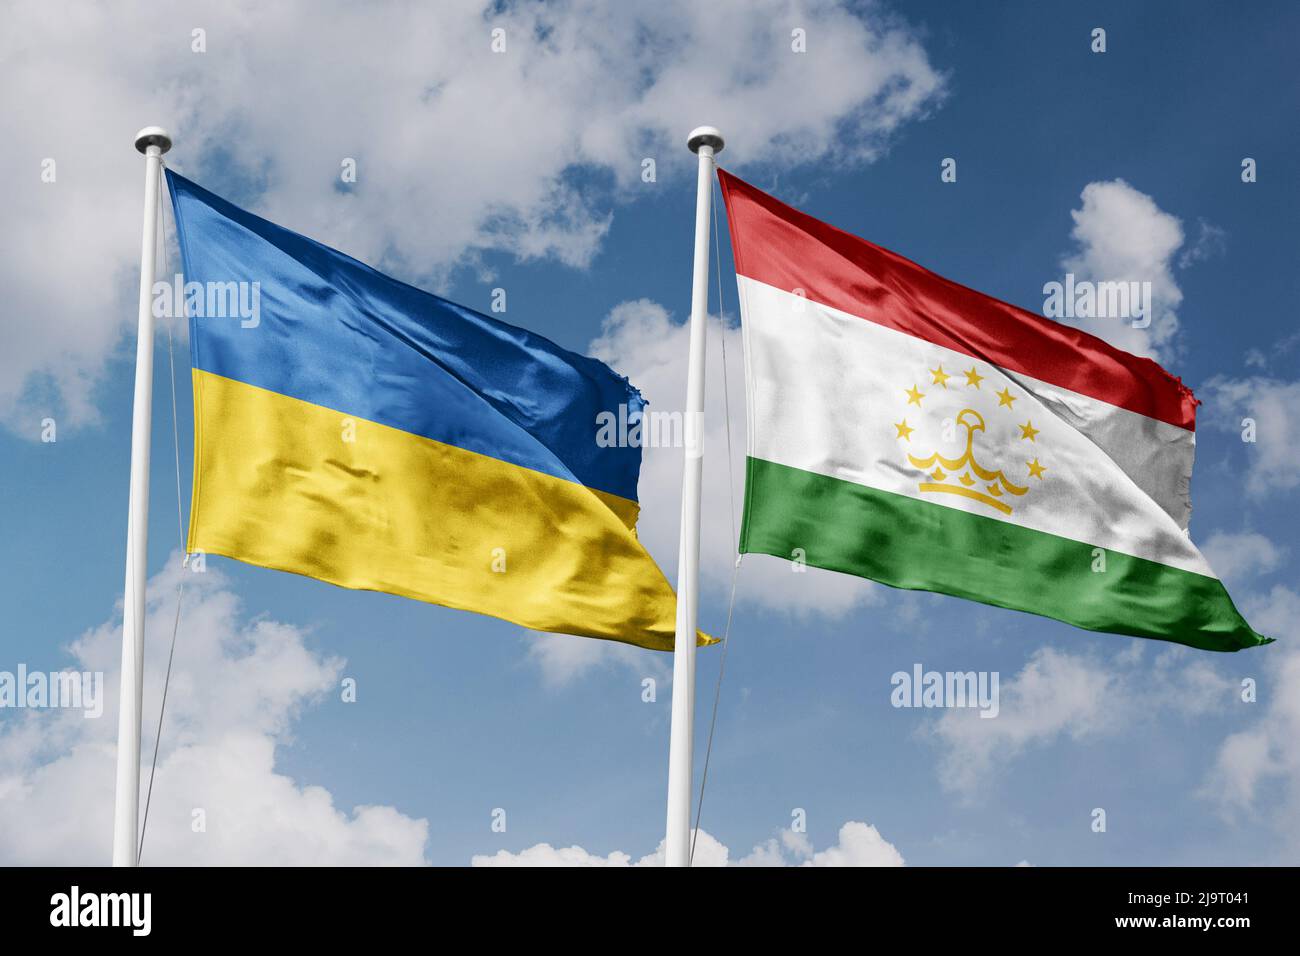 Ukraine and Tajikistan two flags on flagpoles and blue cloudy sky background Stock Photo